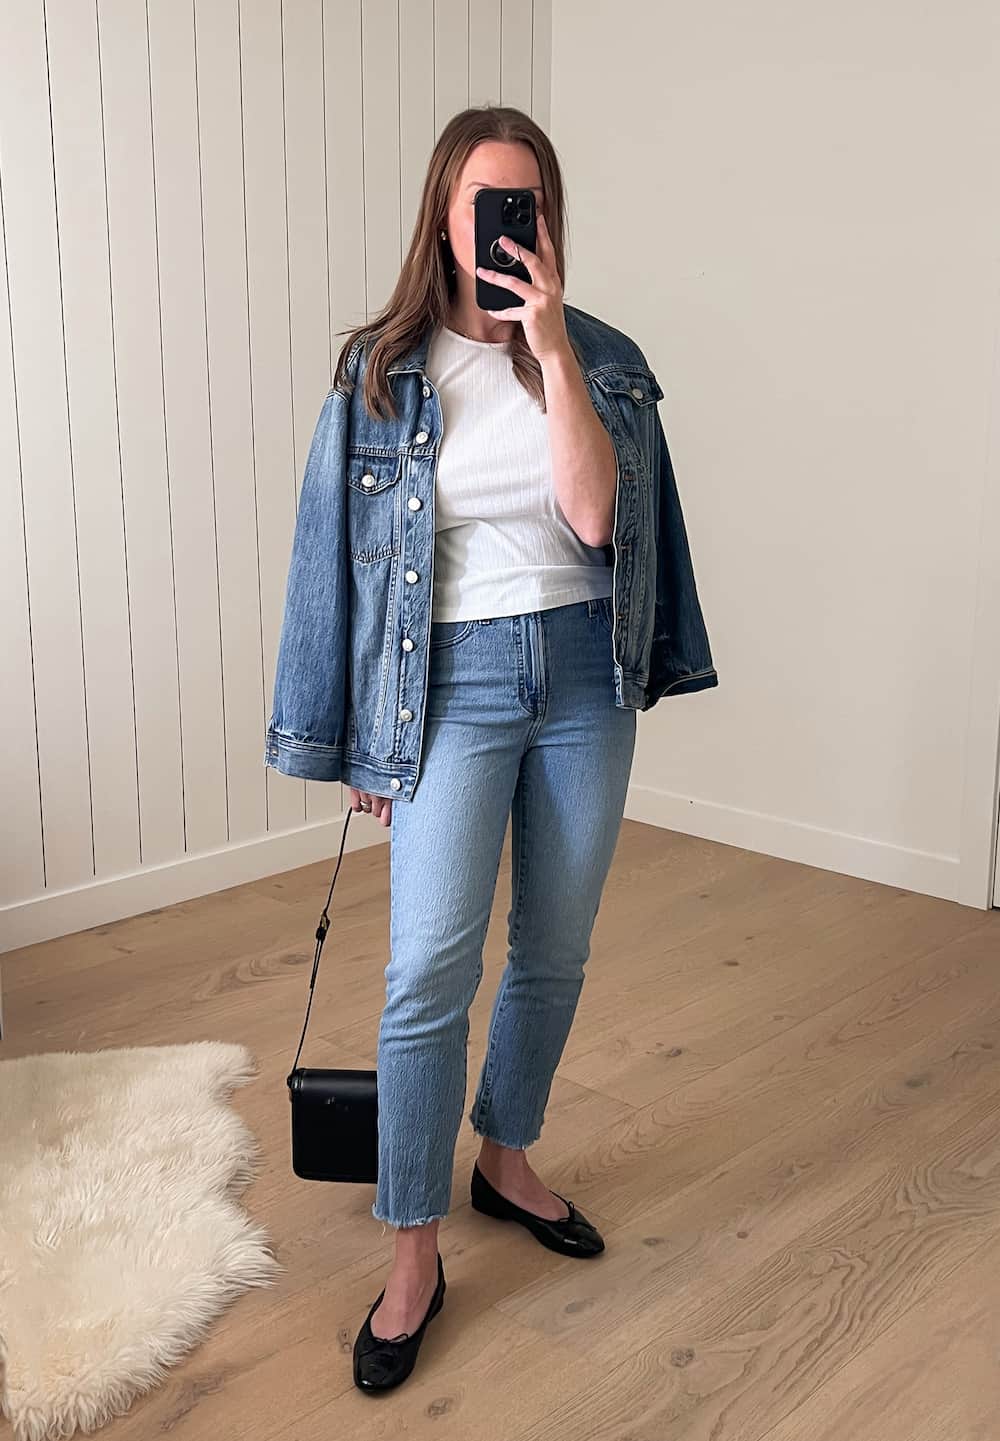 Christal wearing an oversized Madewell denim jacket with a white tee and Madewell blue jeans